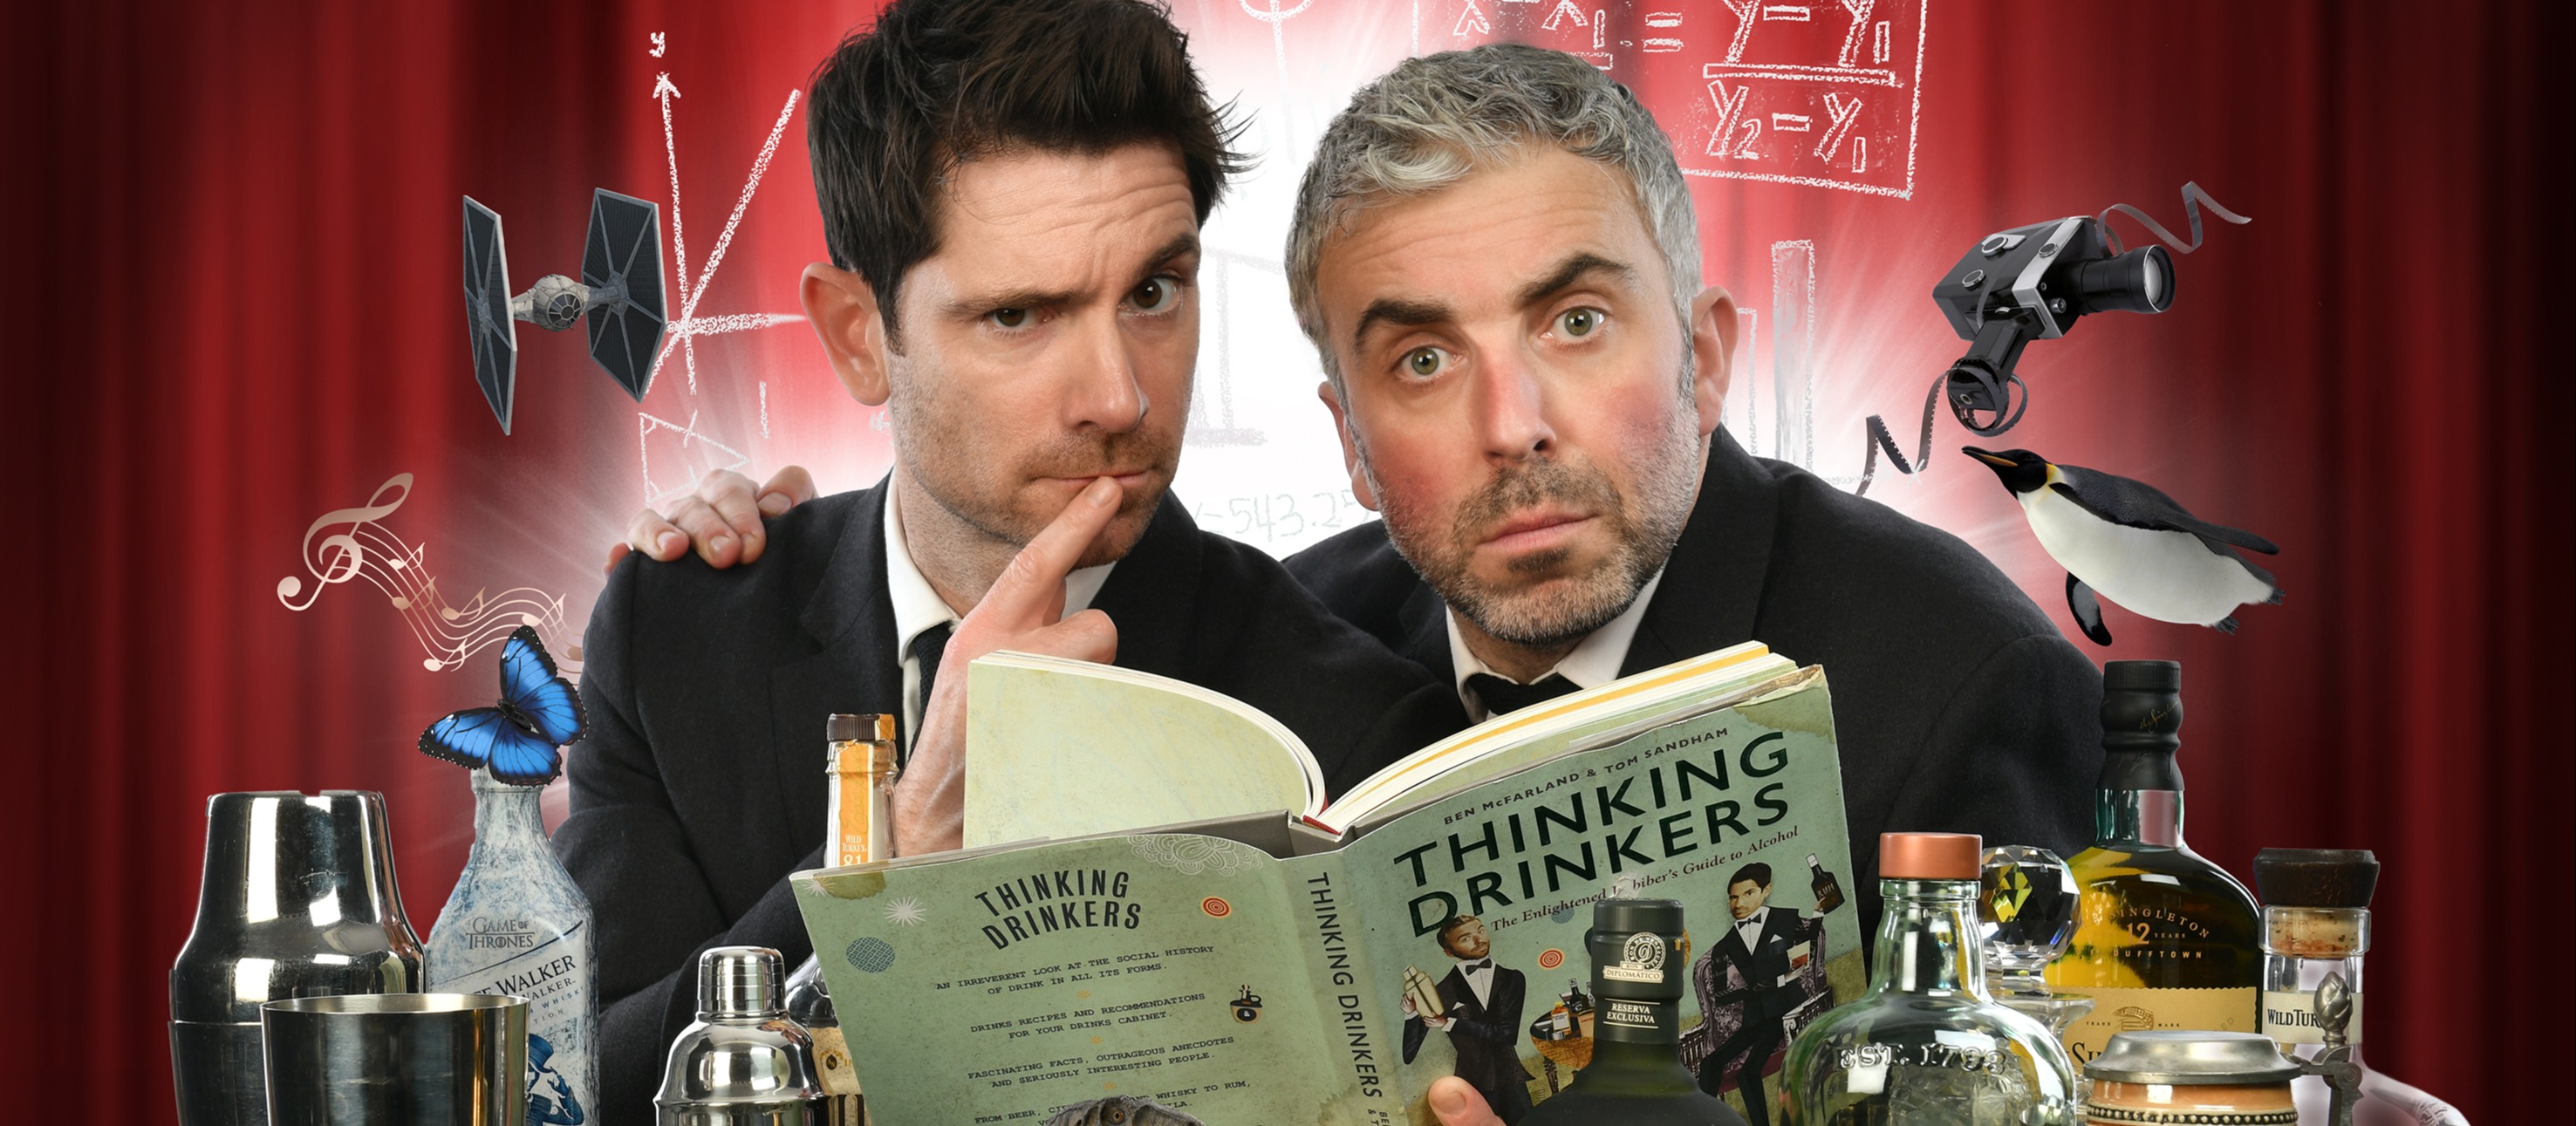 The Thinking Drinkers